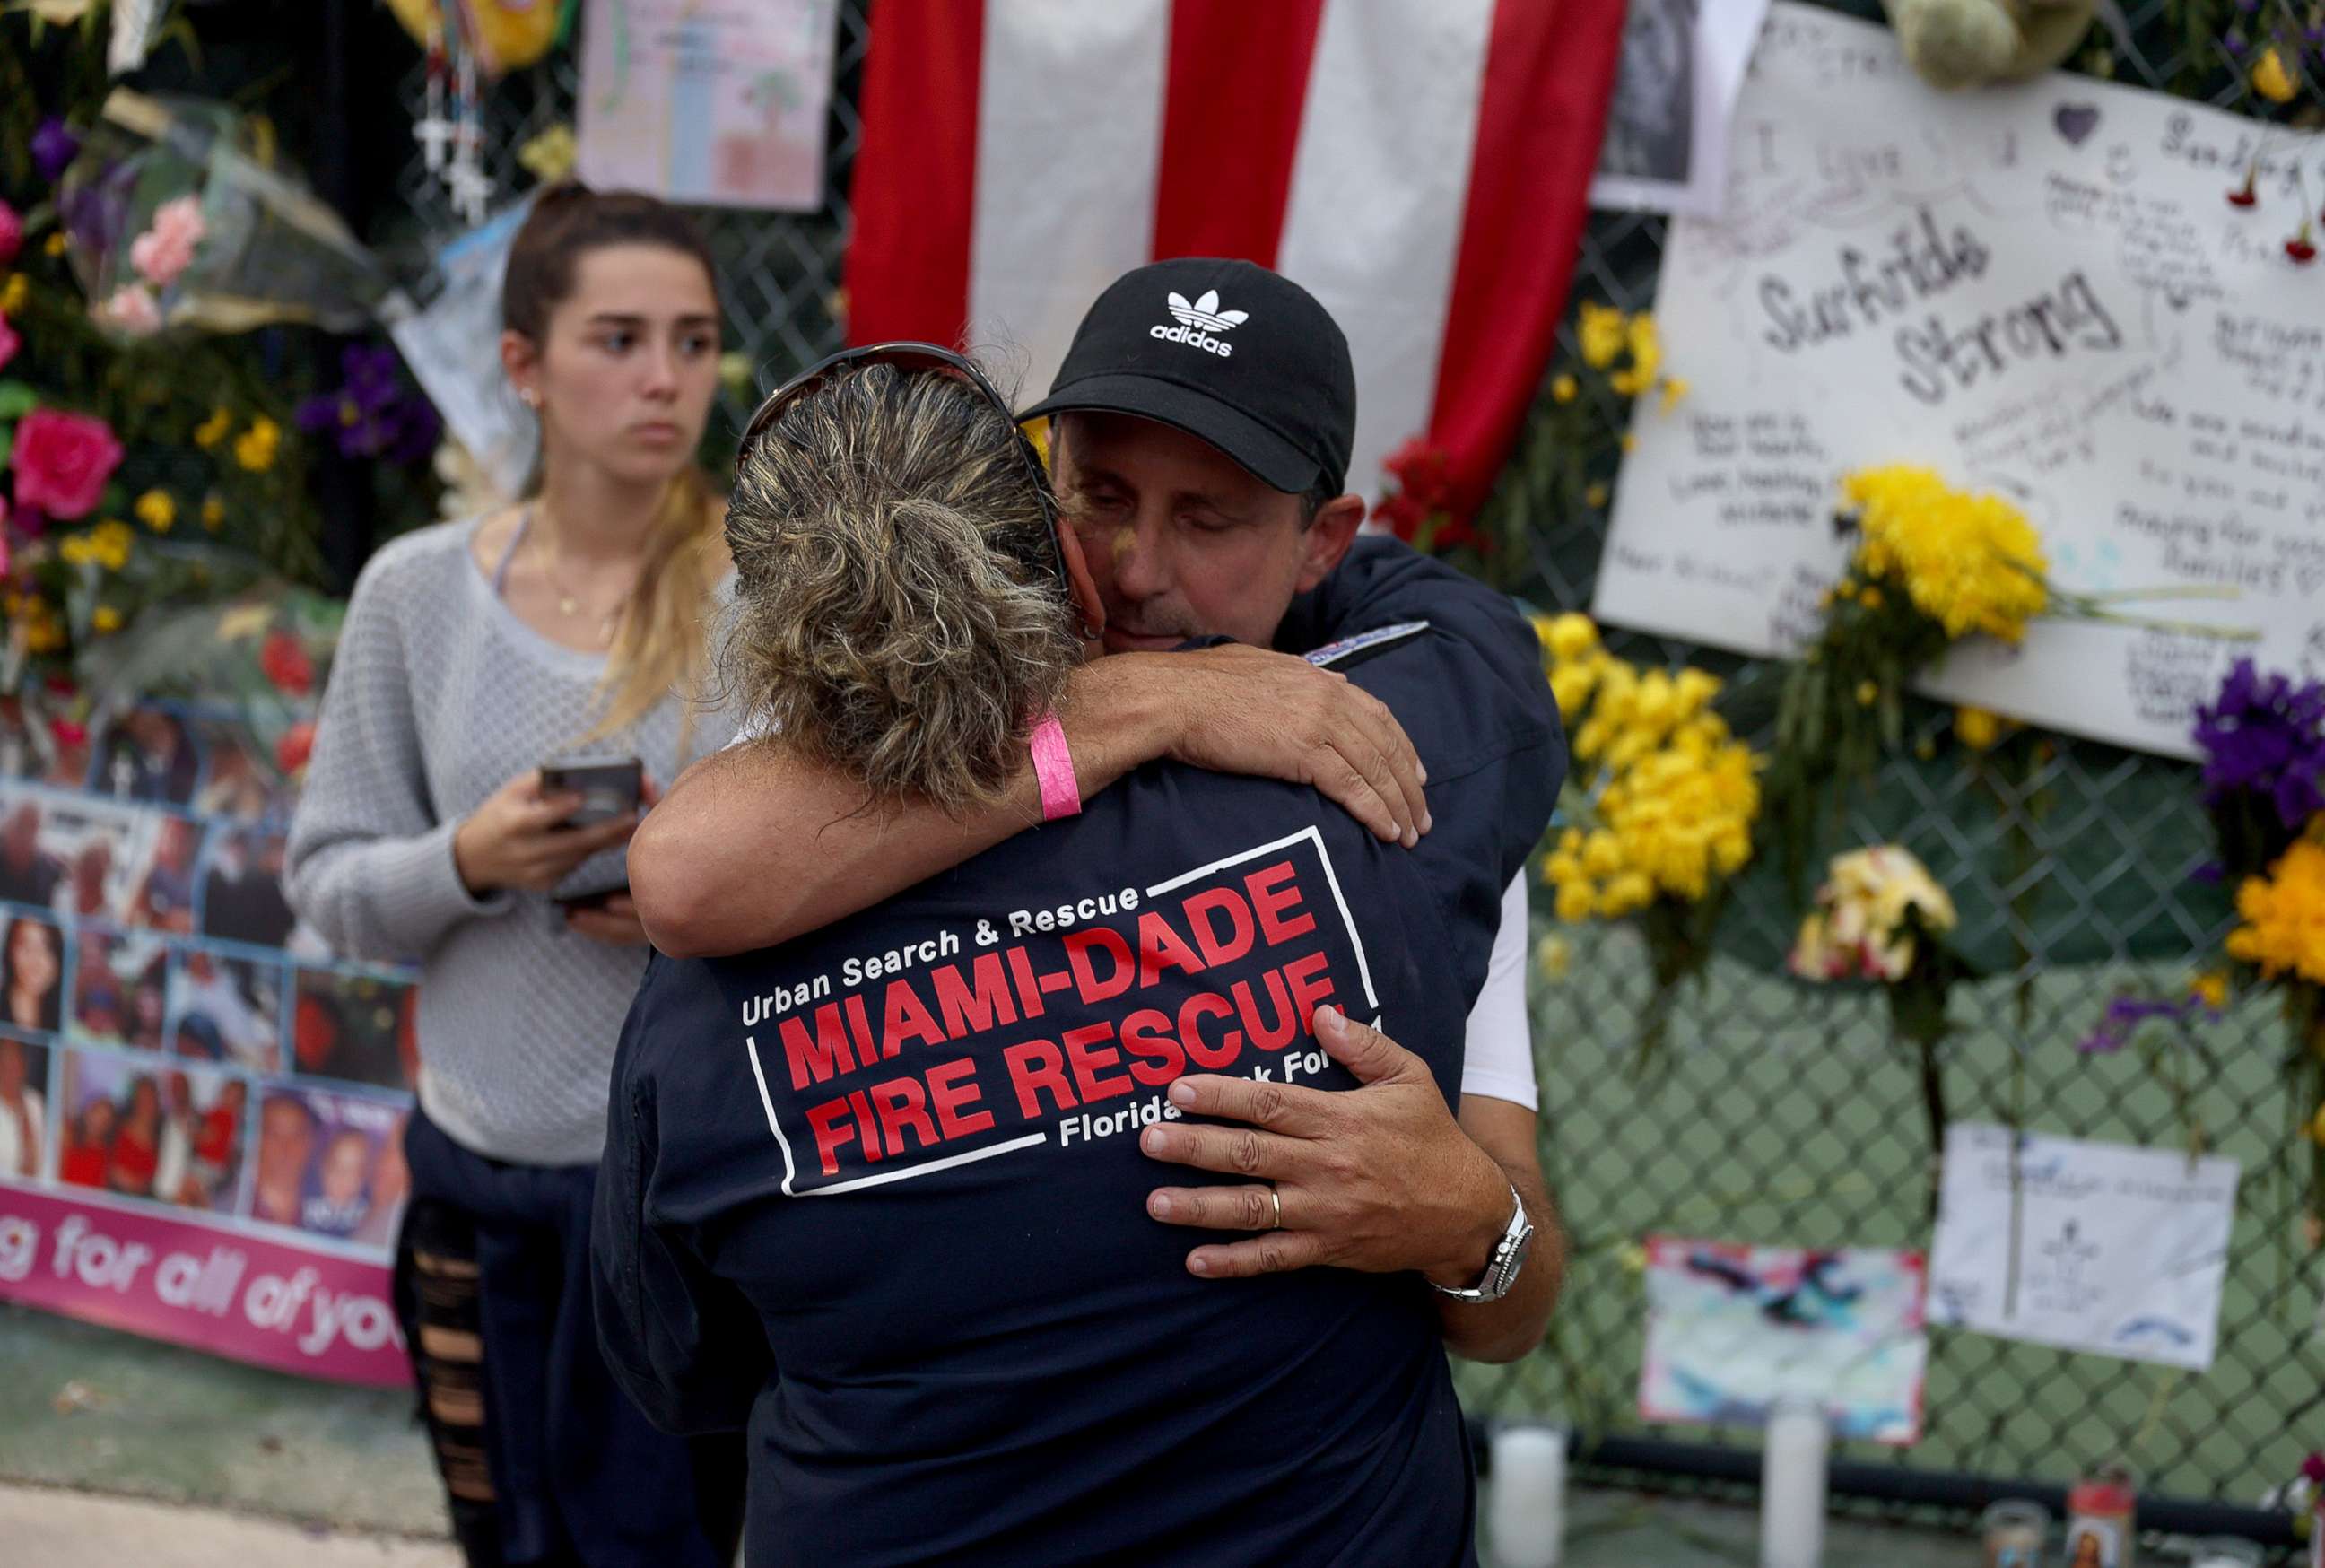 PHOTO: Search and Rescue personnel Maggie Castro hugs Pablo Langesfeld as they visit the memorial to the victims in the collapsed 12-story Champlain Towers South condo building, July 7, 2021, in Surfside, Fla.